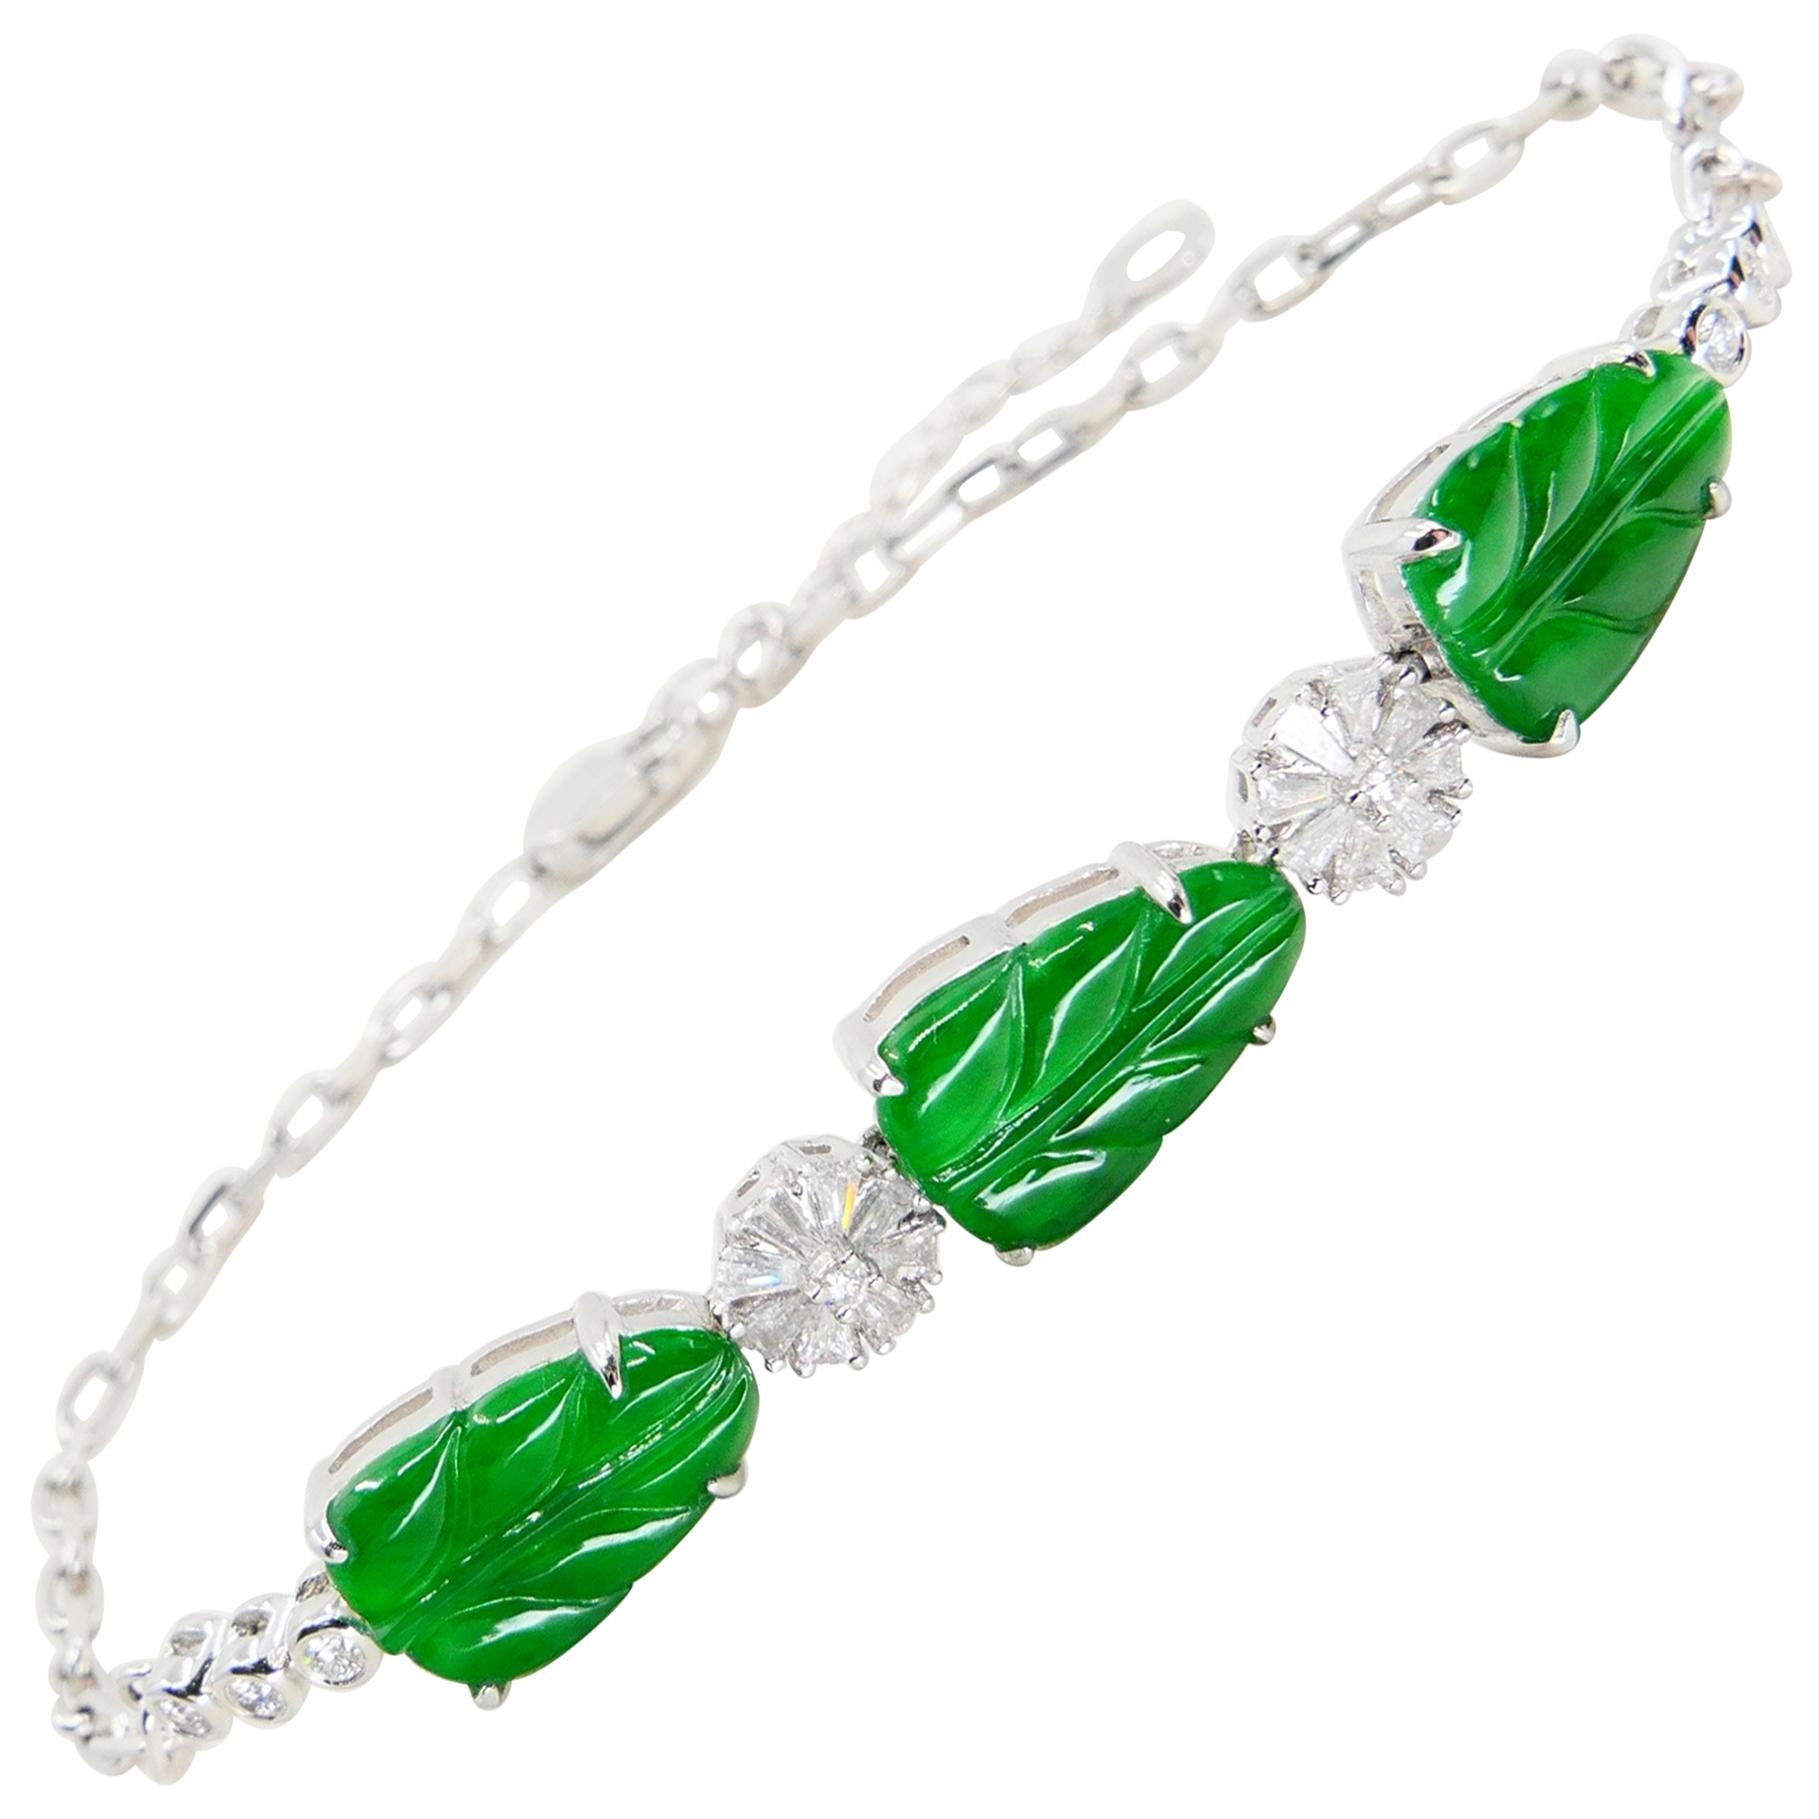 Certified Icy Apple Green Jade and Diamond Bracelet, Borderline Imperial Green For Sale